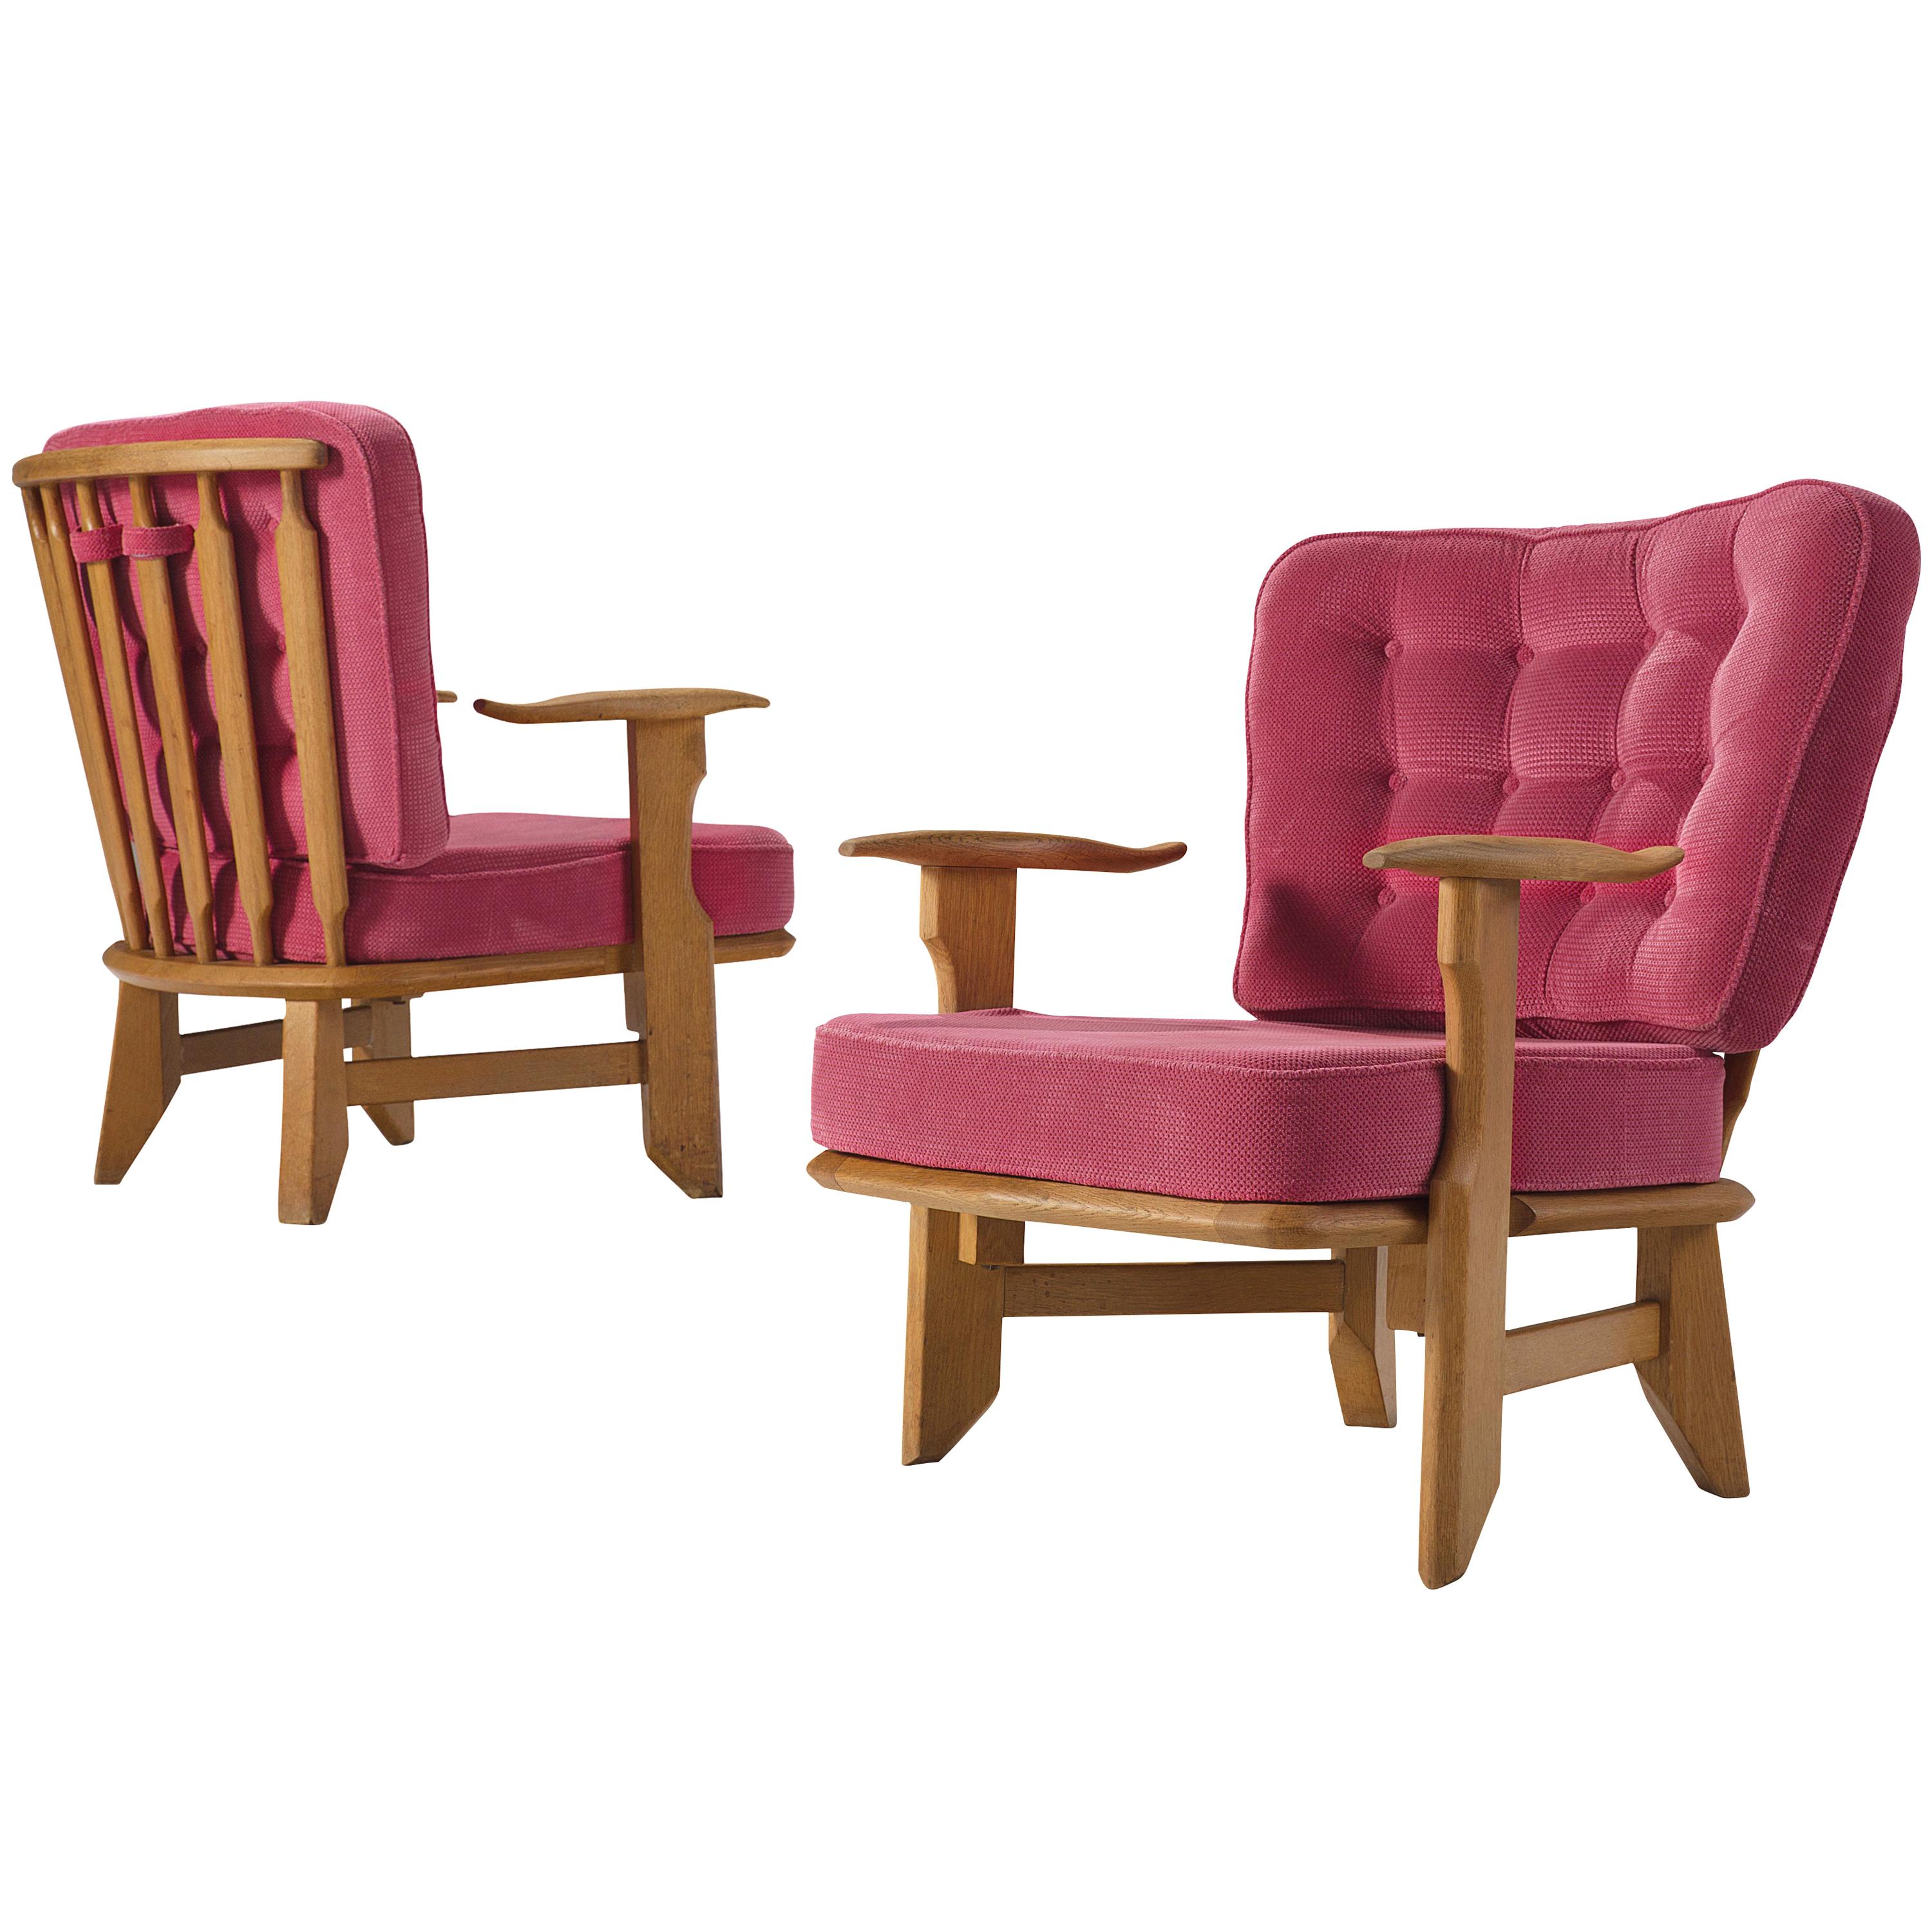 Guillerme and Chambron Pair of 'Catherine' Lounge Chairs in Pink Upholstery  For Sale at 1stDibs | guillerme et chambron chairs